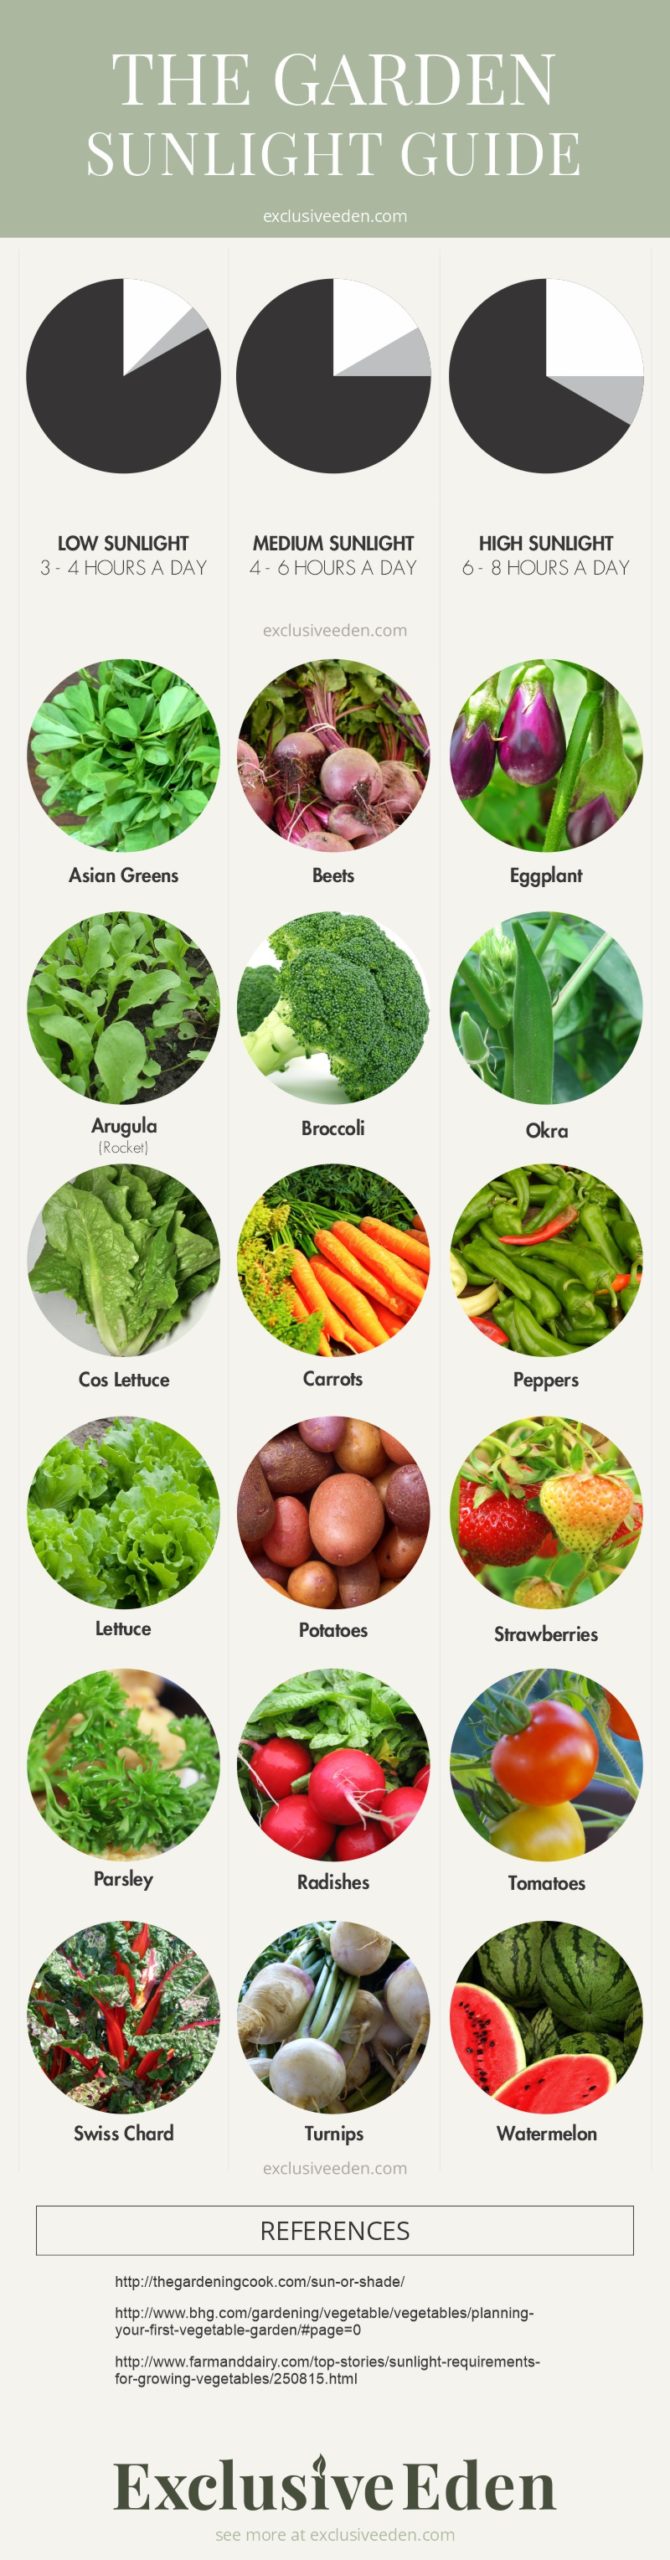 An infographic that helps guide how much sunlight your vegetables are recommended.